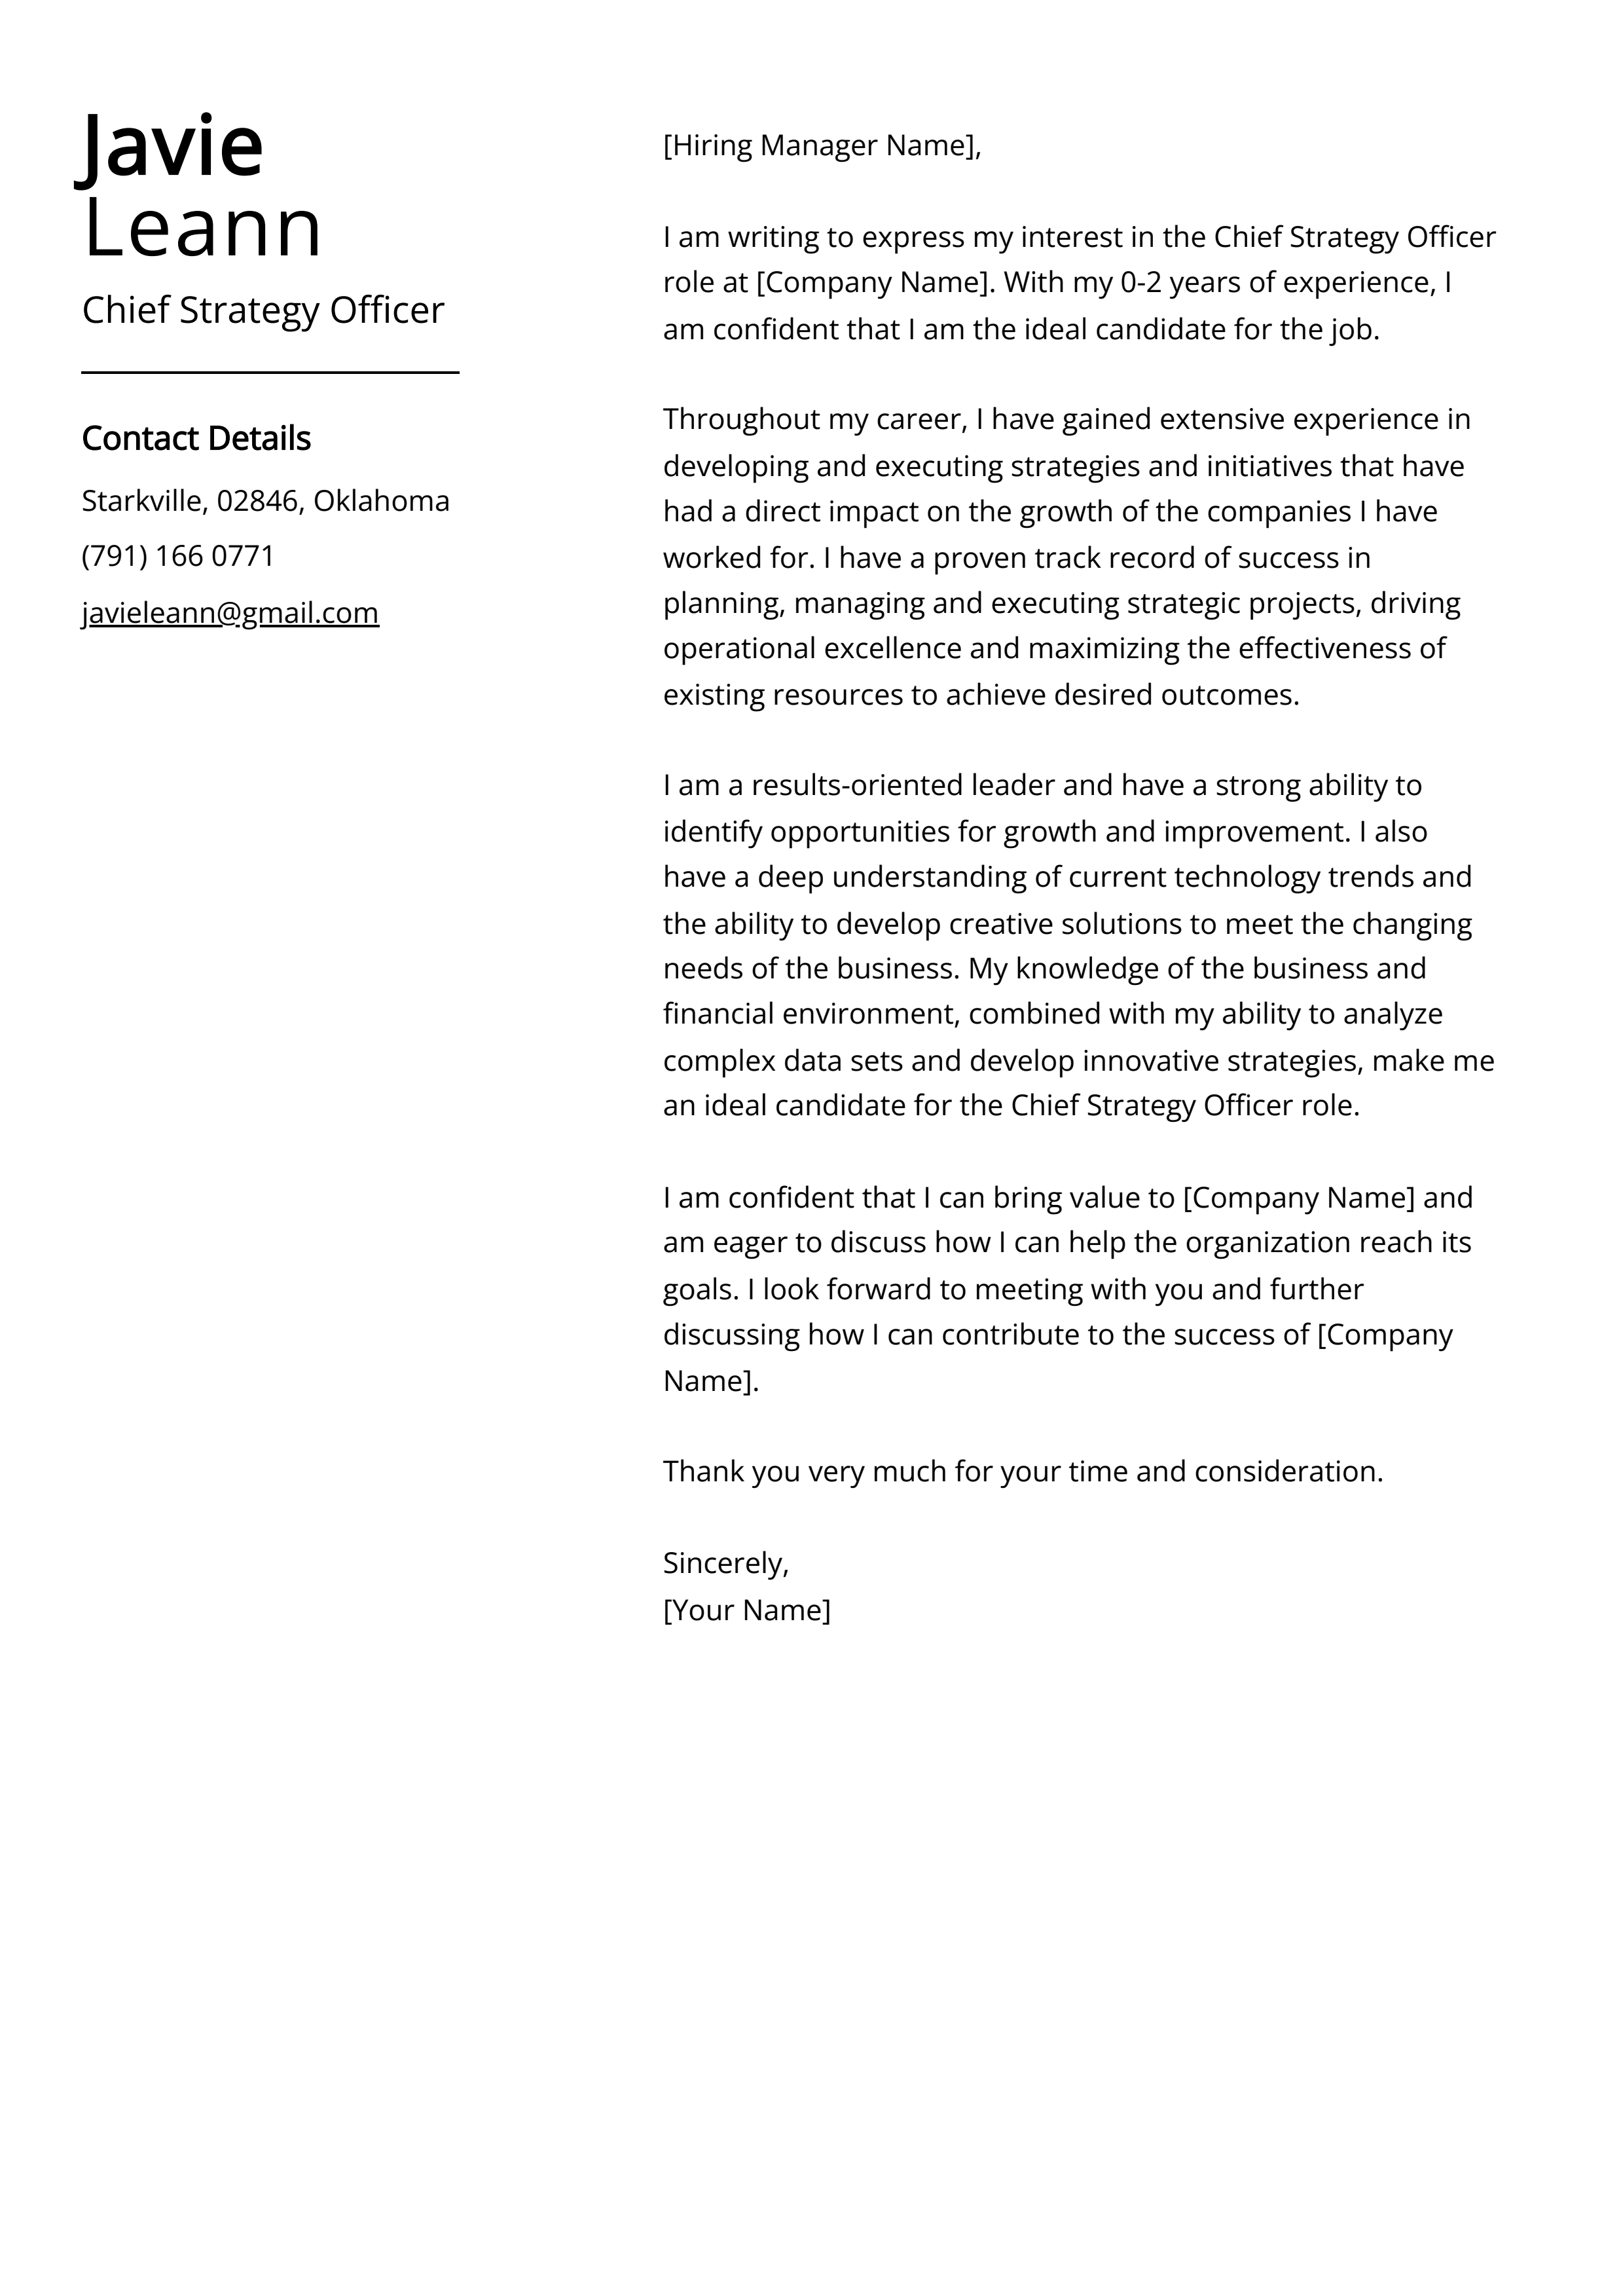 Chief Strategy Officer Cover Letter Example